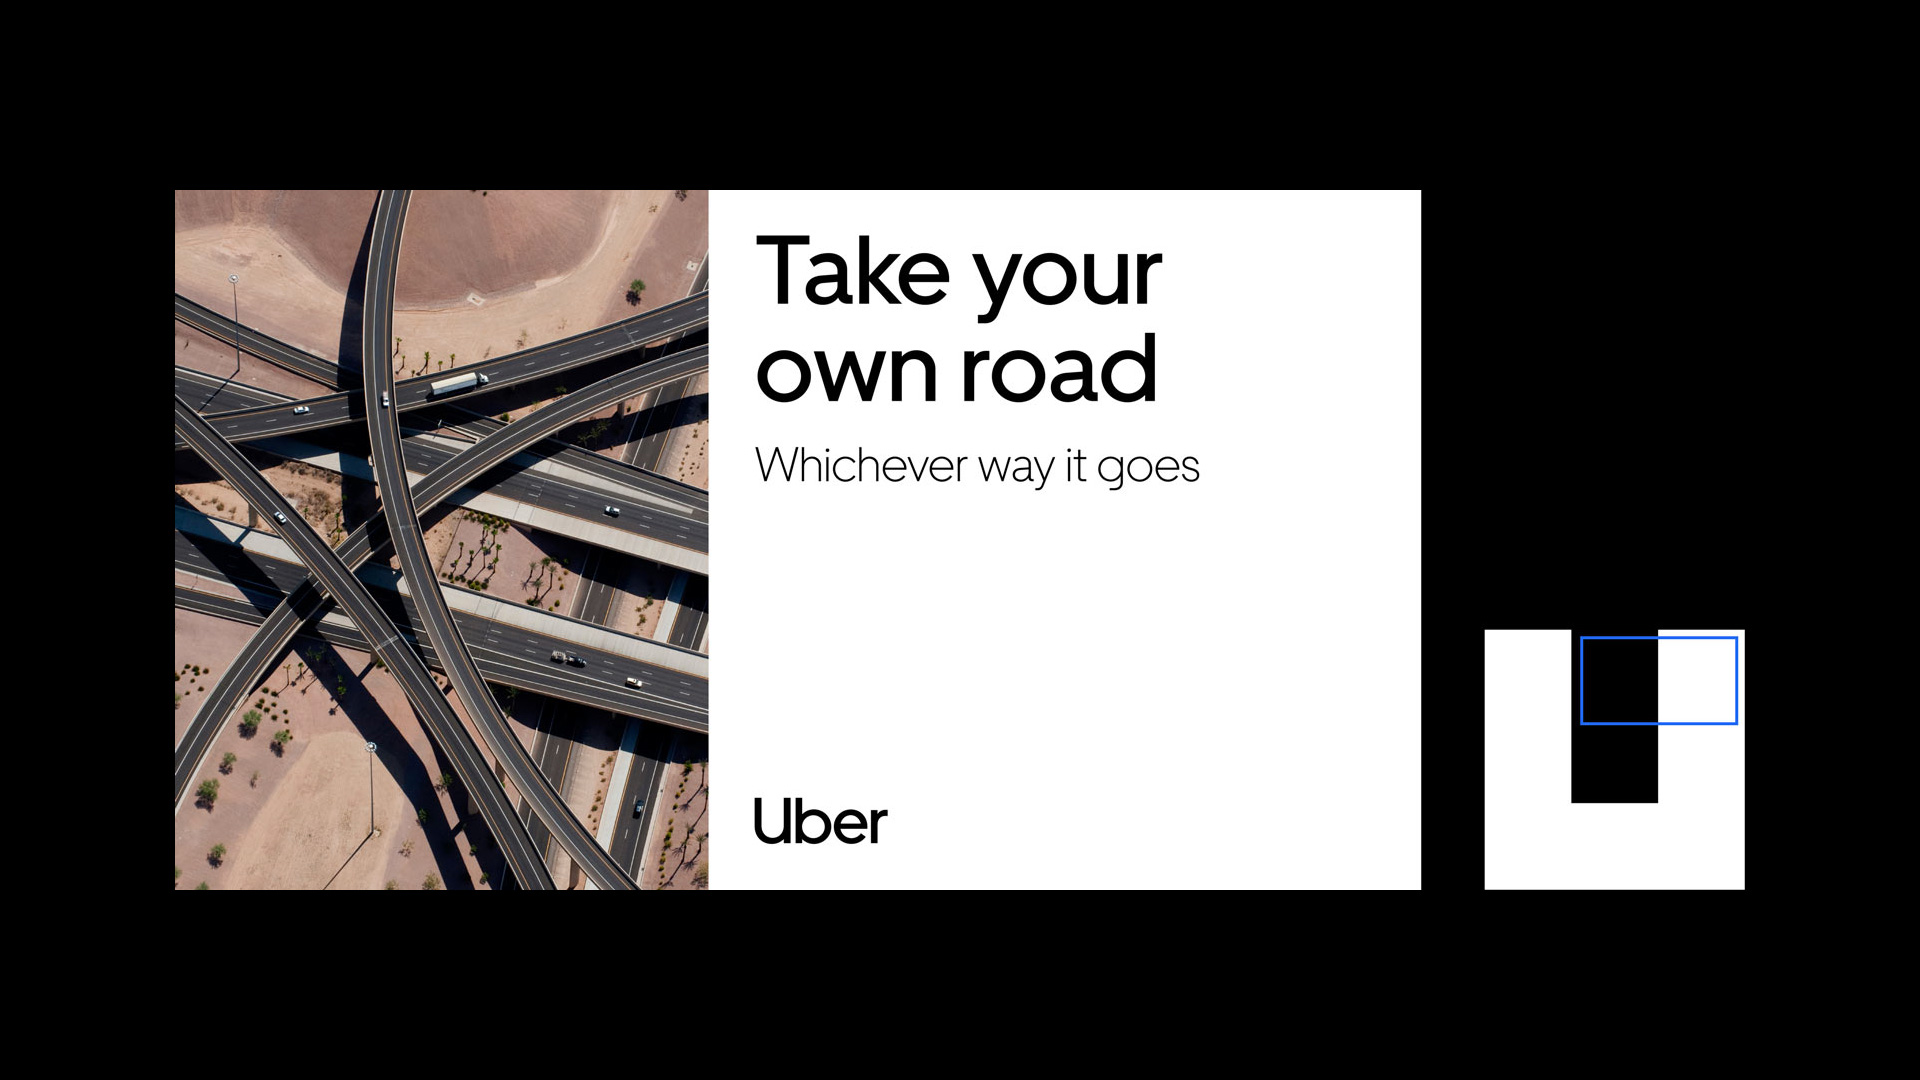 New Logo And Identity For Uber By Wolff Olins And In-house - Uber Take Your Own Road - HD Wallpaper 